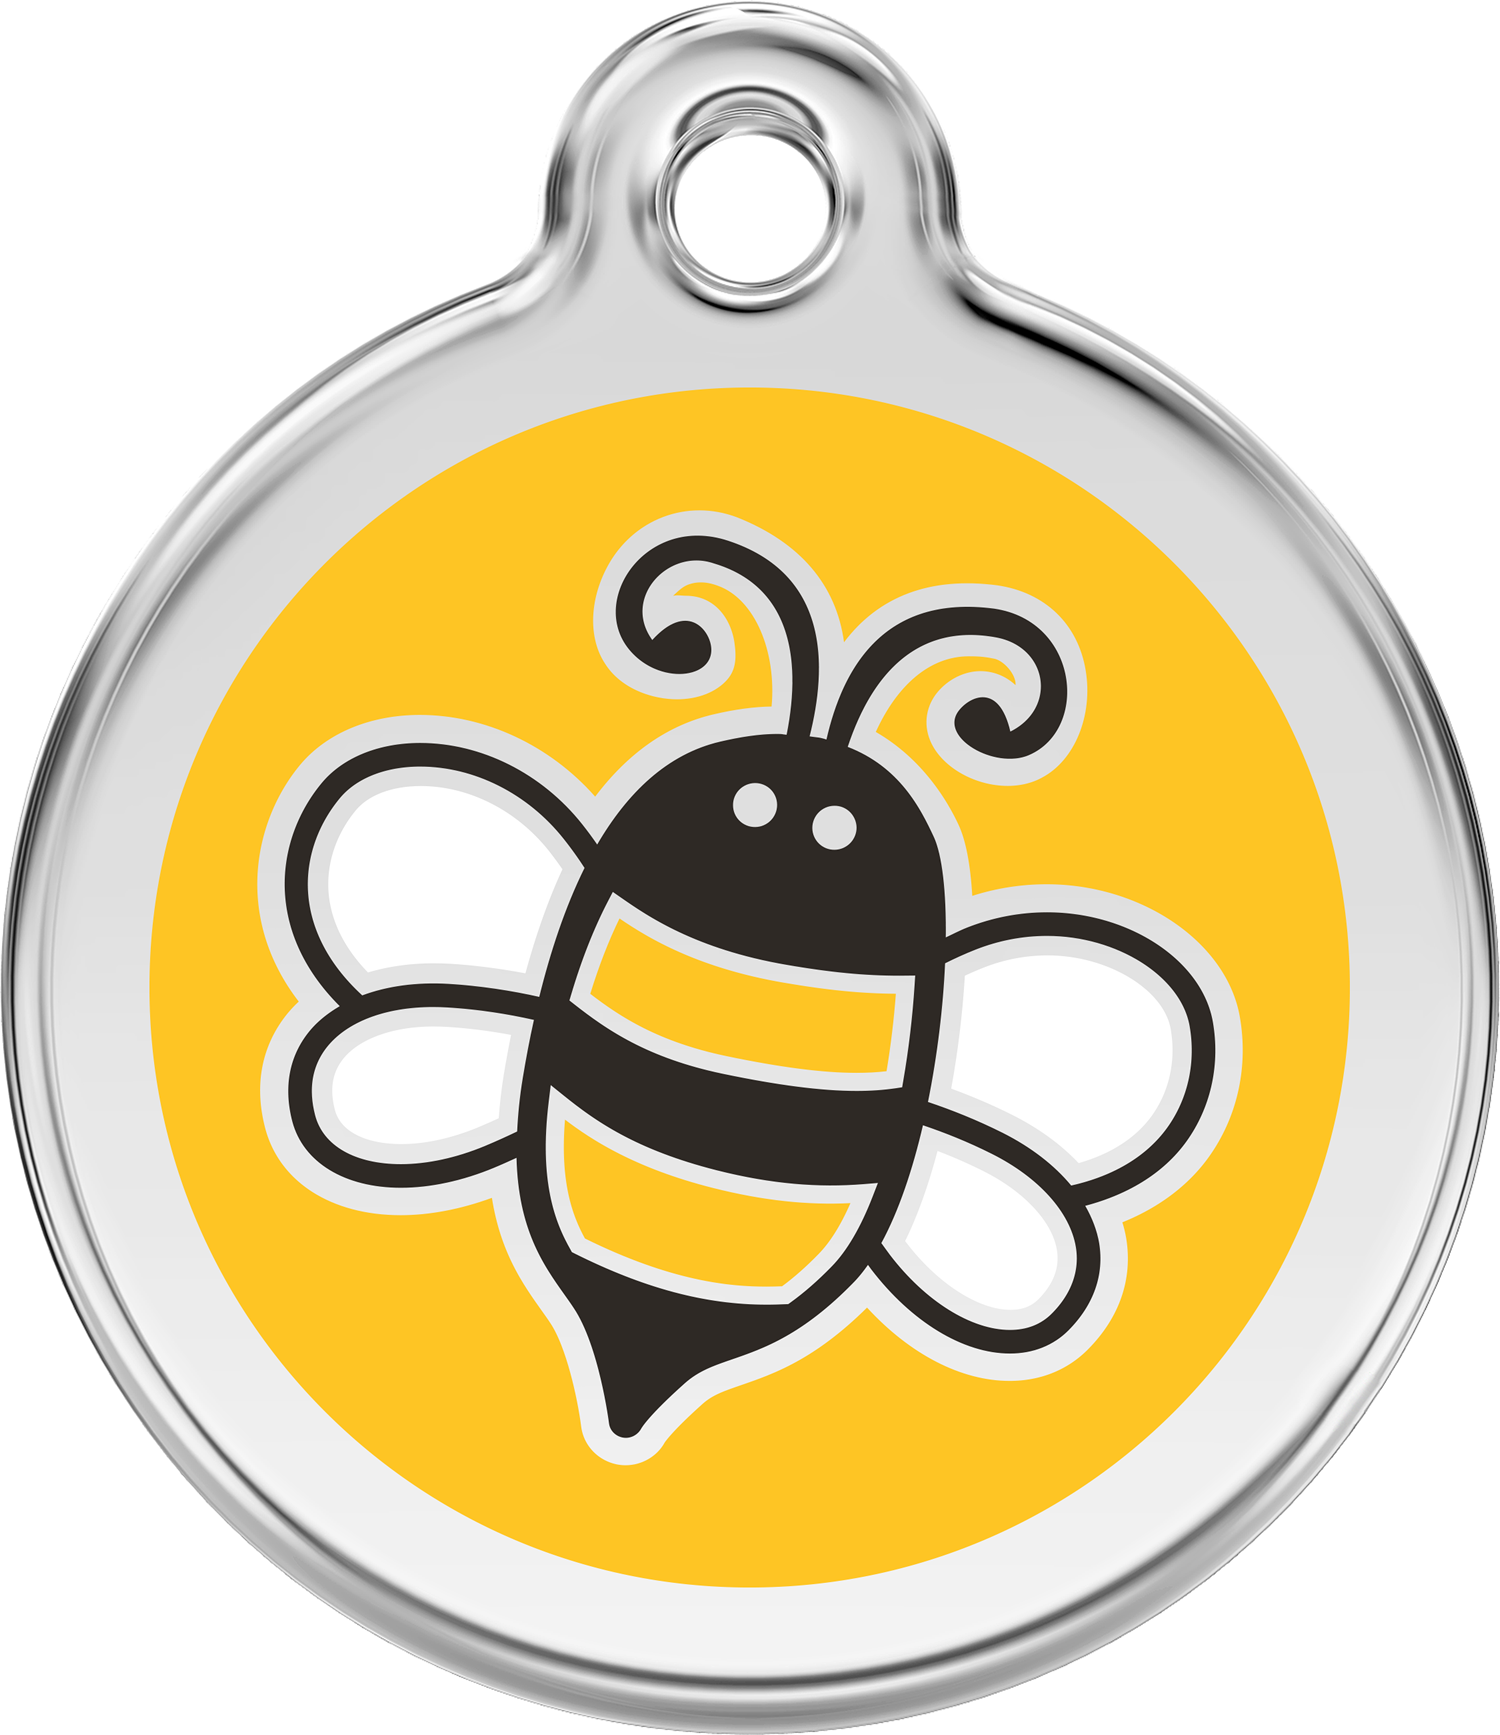 Red Dingo Stainless Steel & Enamel Bumble Bee Dog ID Tag - Yellow